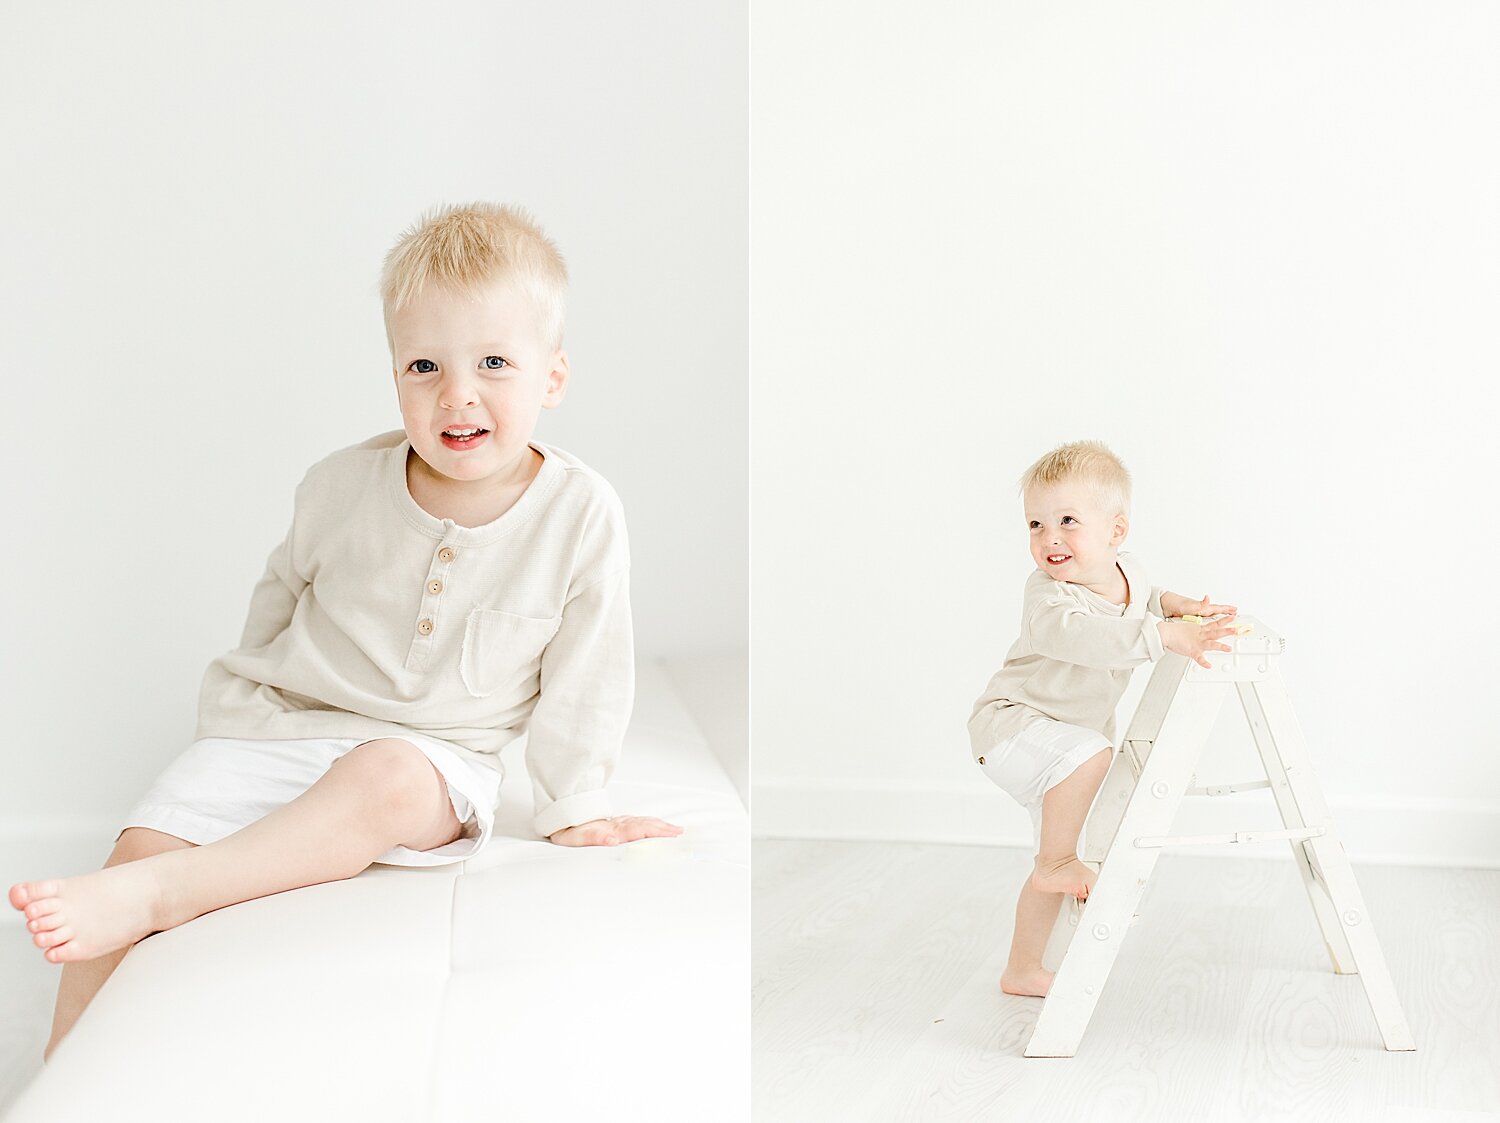 Toddler photos in studio in Westport, CT. Photos by Kristin Wood Photography.